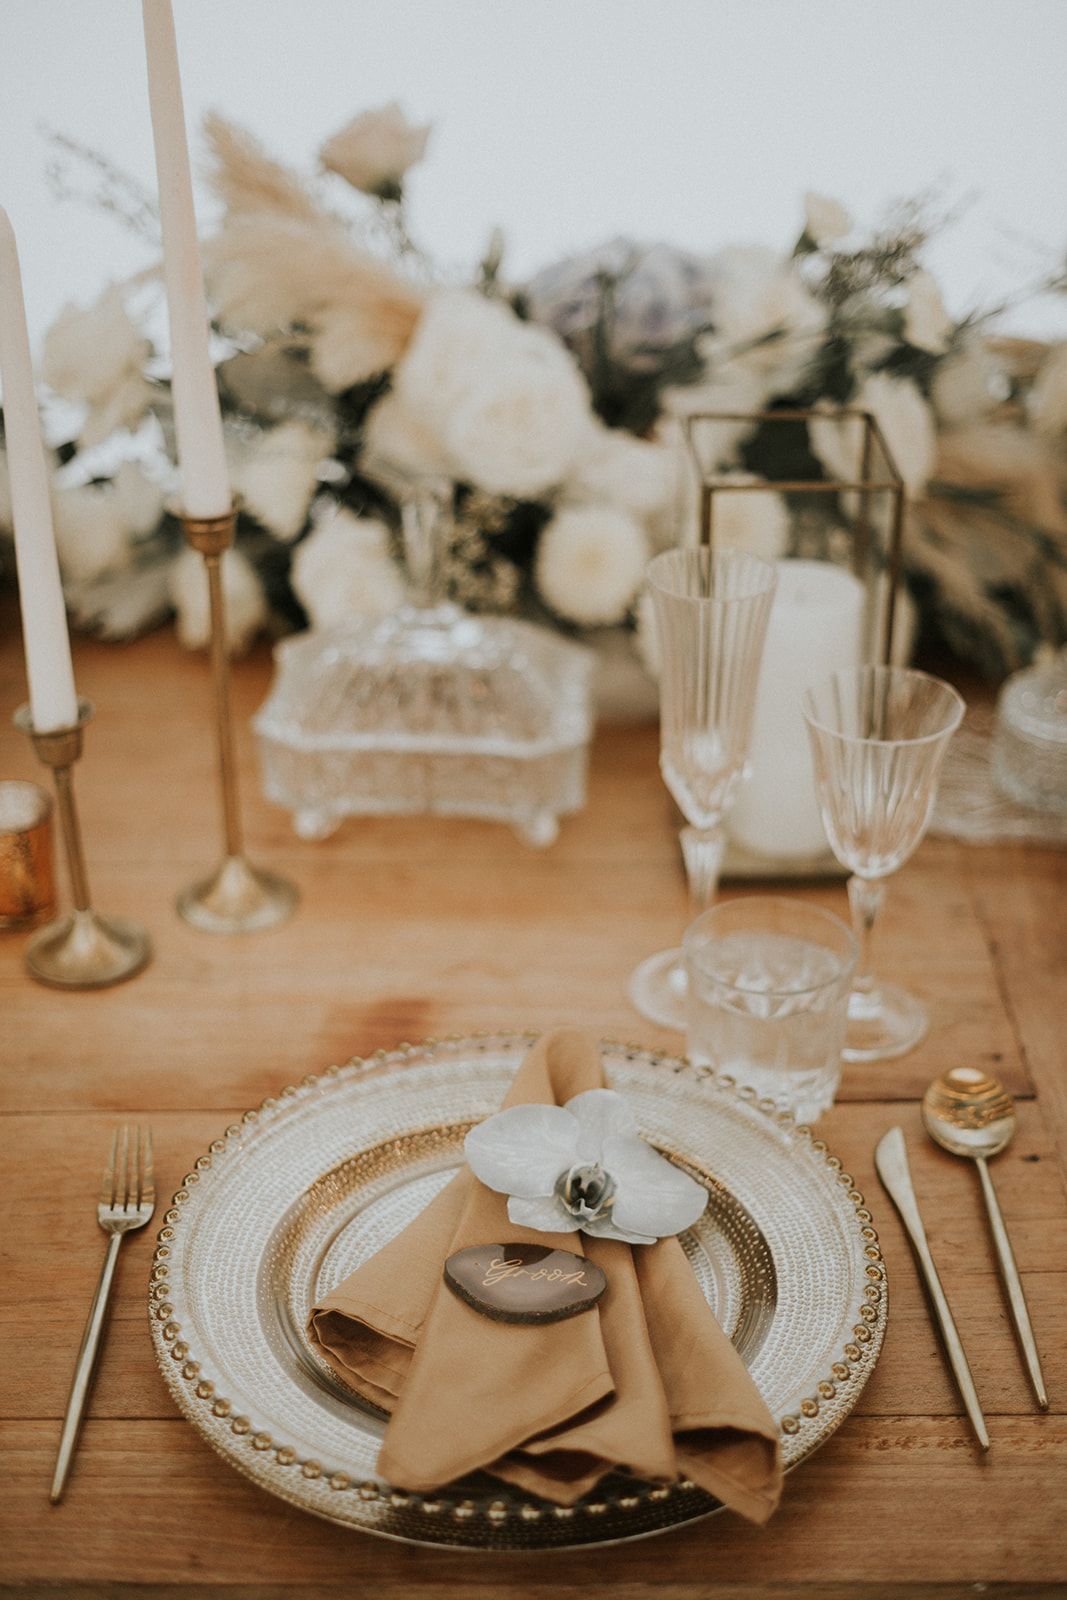 Rustic luxury wedding theme, indulge in a timeless palette of earthy tones.